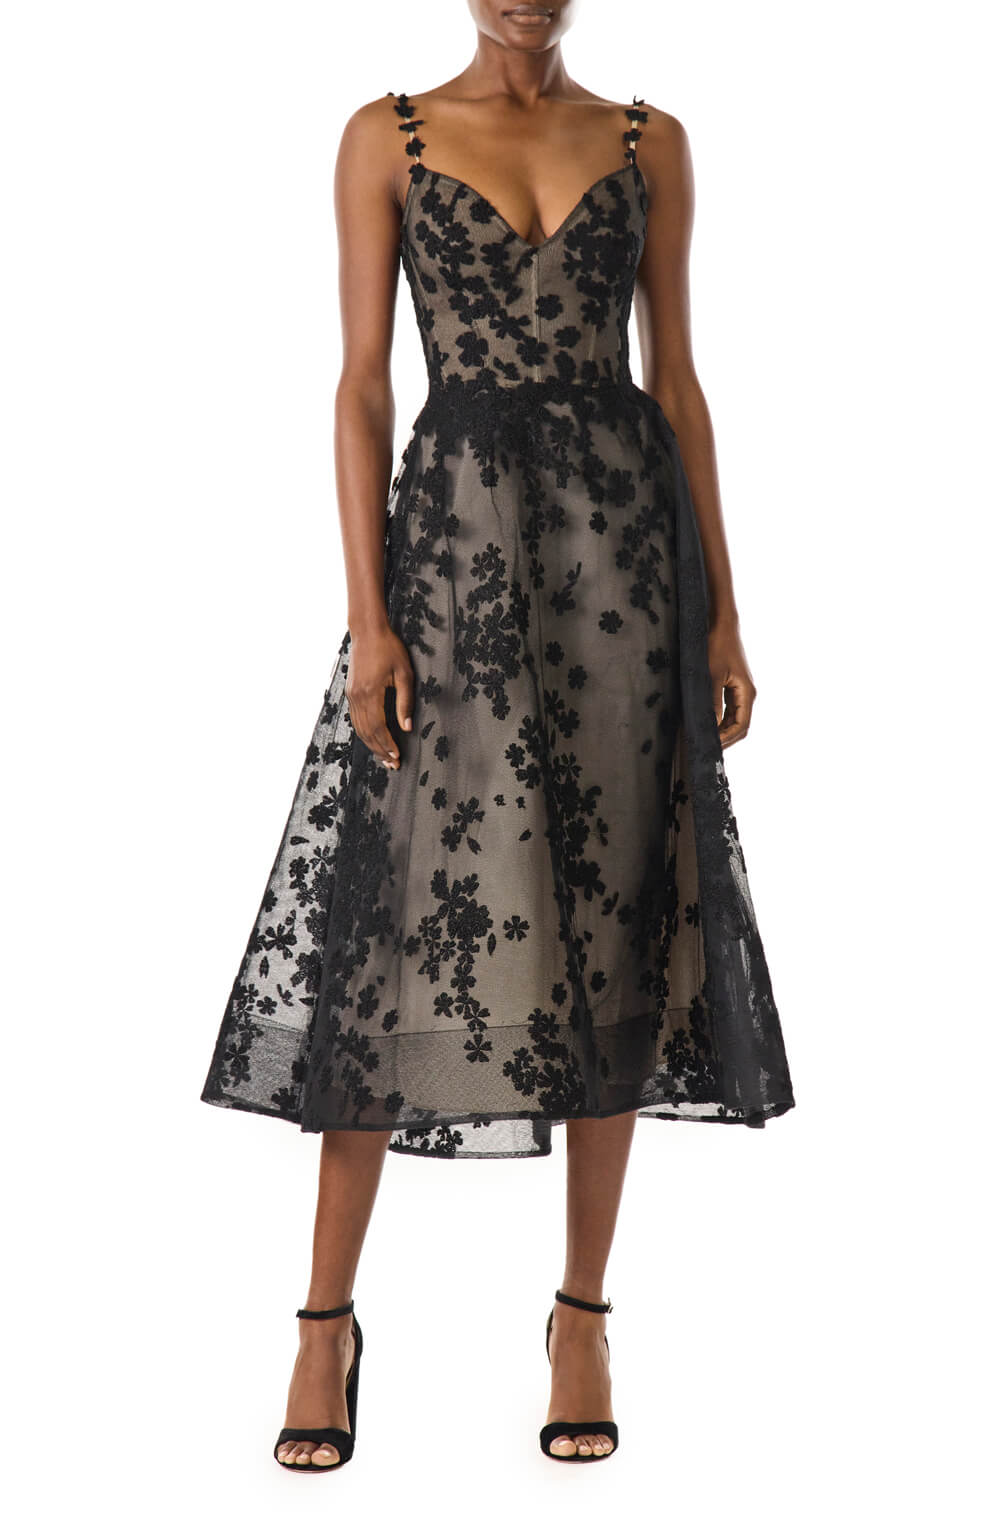 Monique Lhuillier black lace and embroidered tulle aline cocktail dress with spaghetti straps.